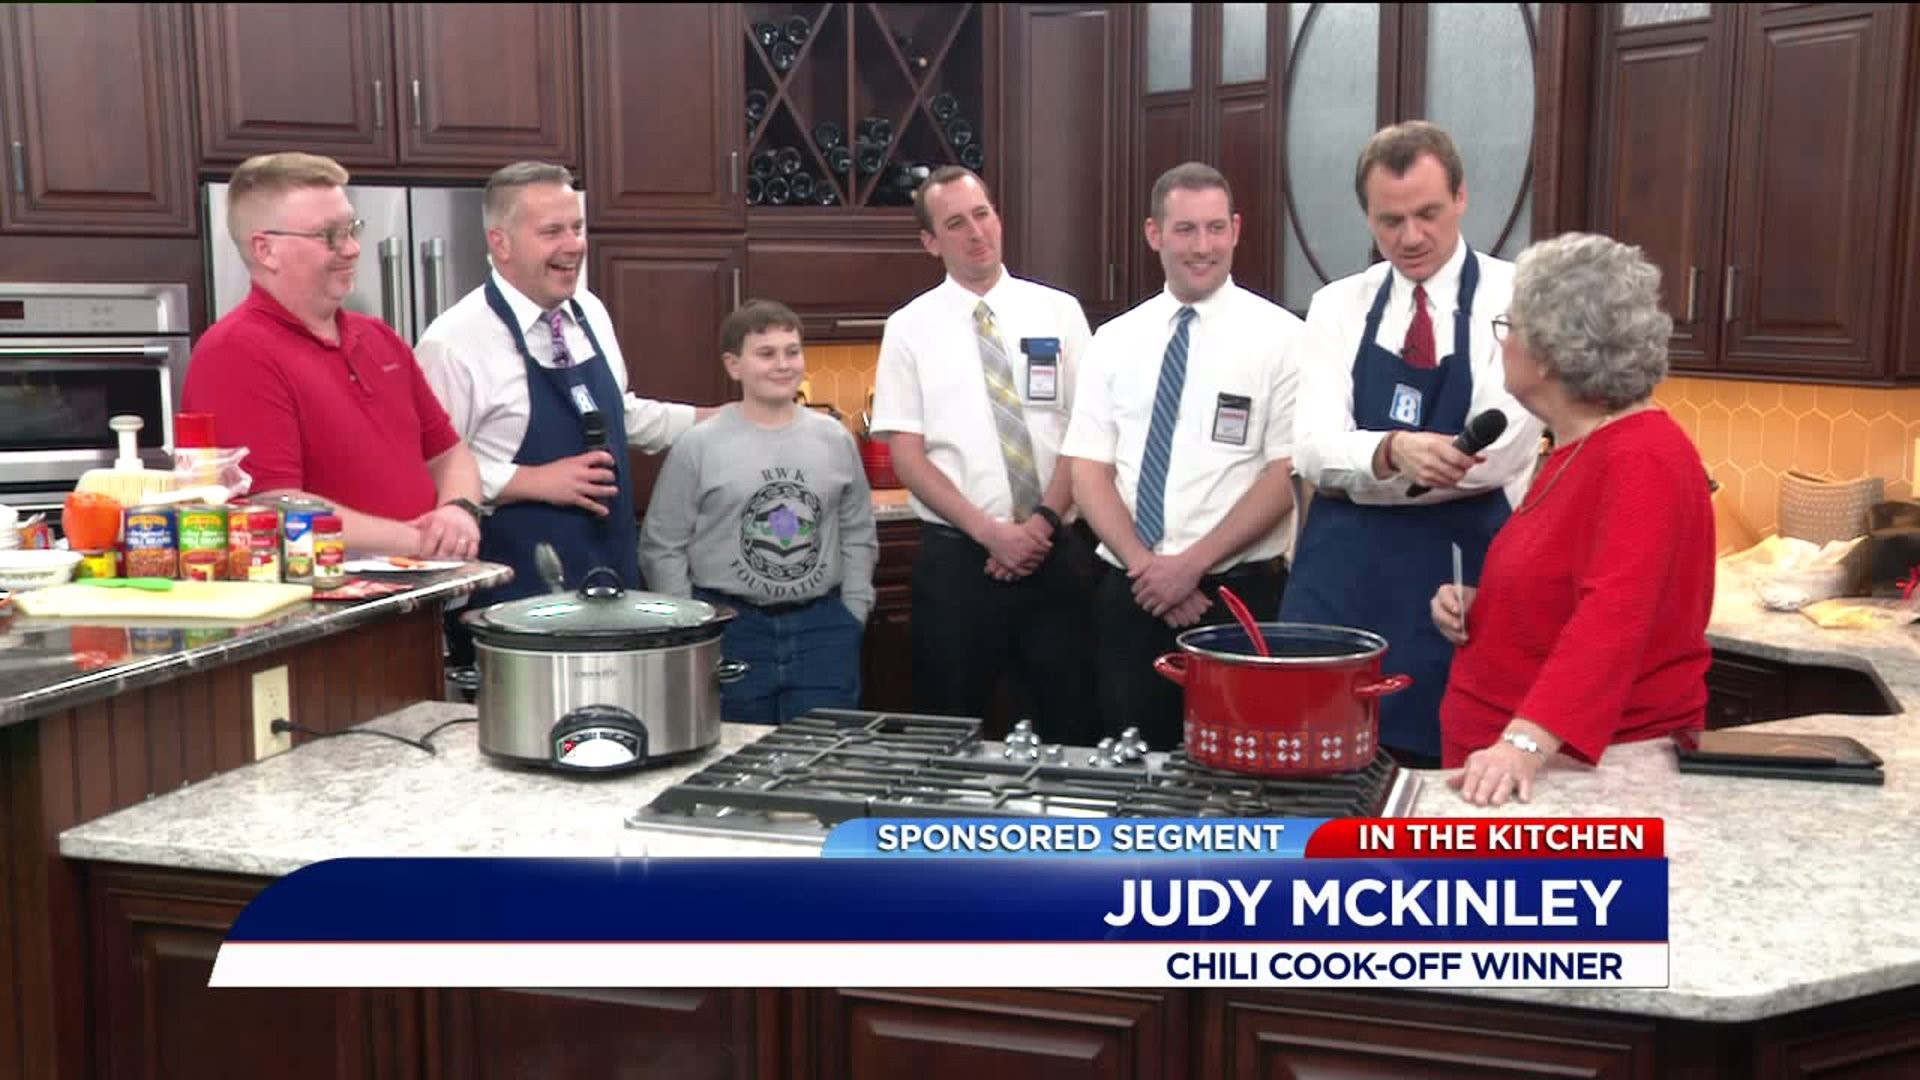 Judy McKinley wins our chili cook-off contest